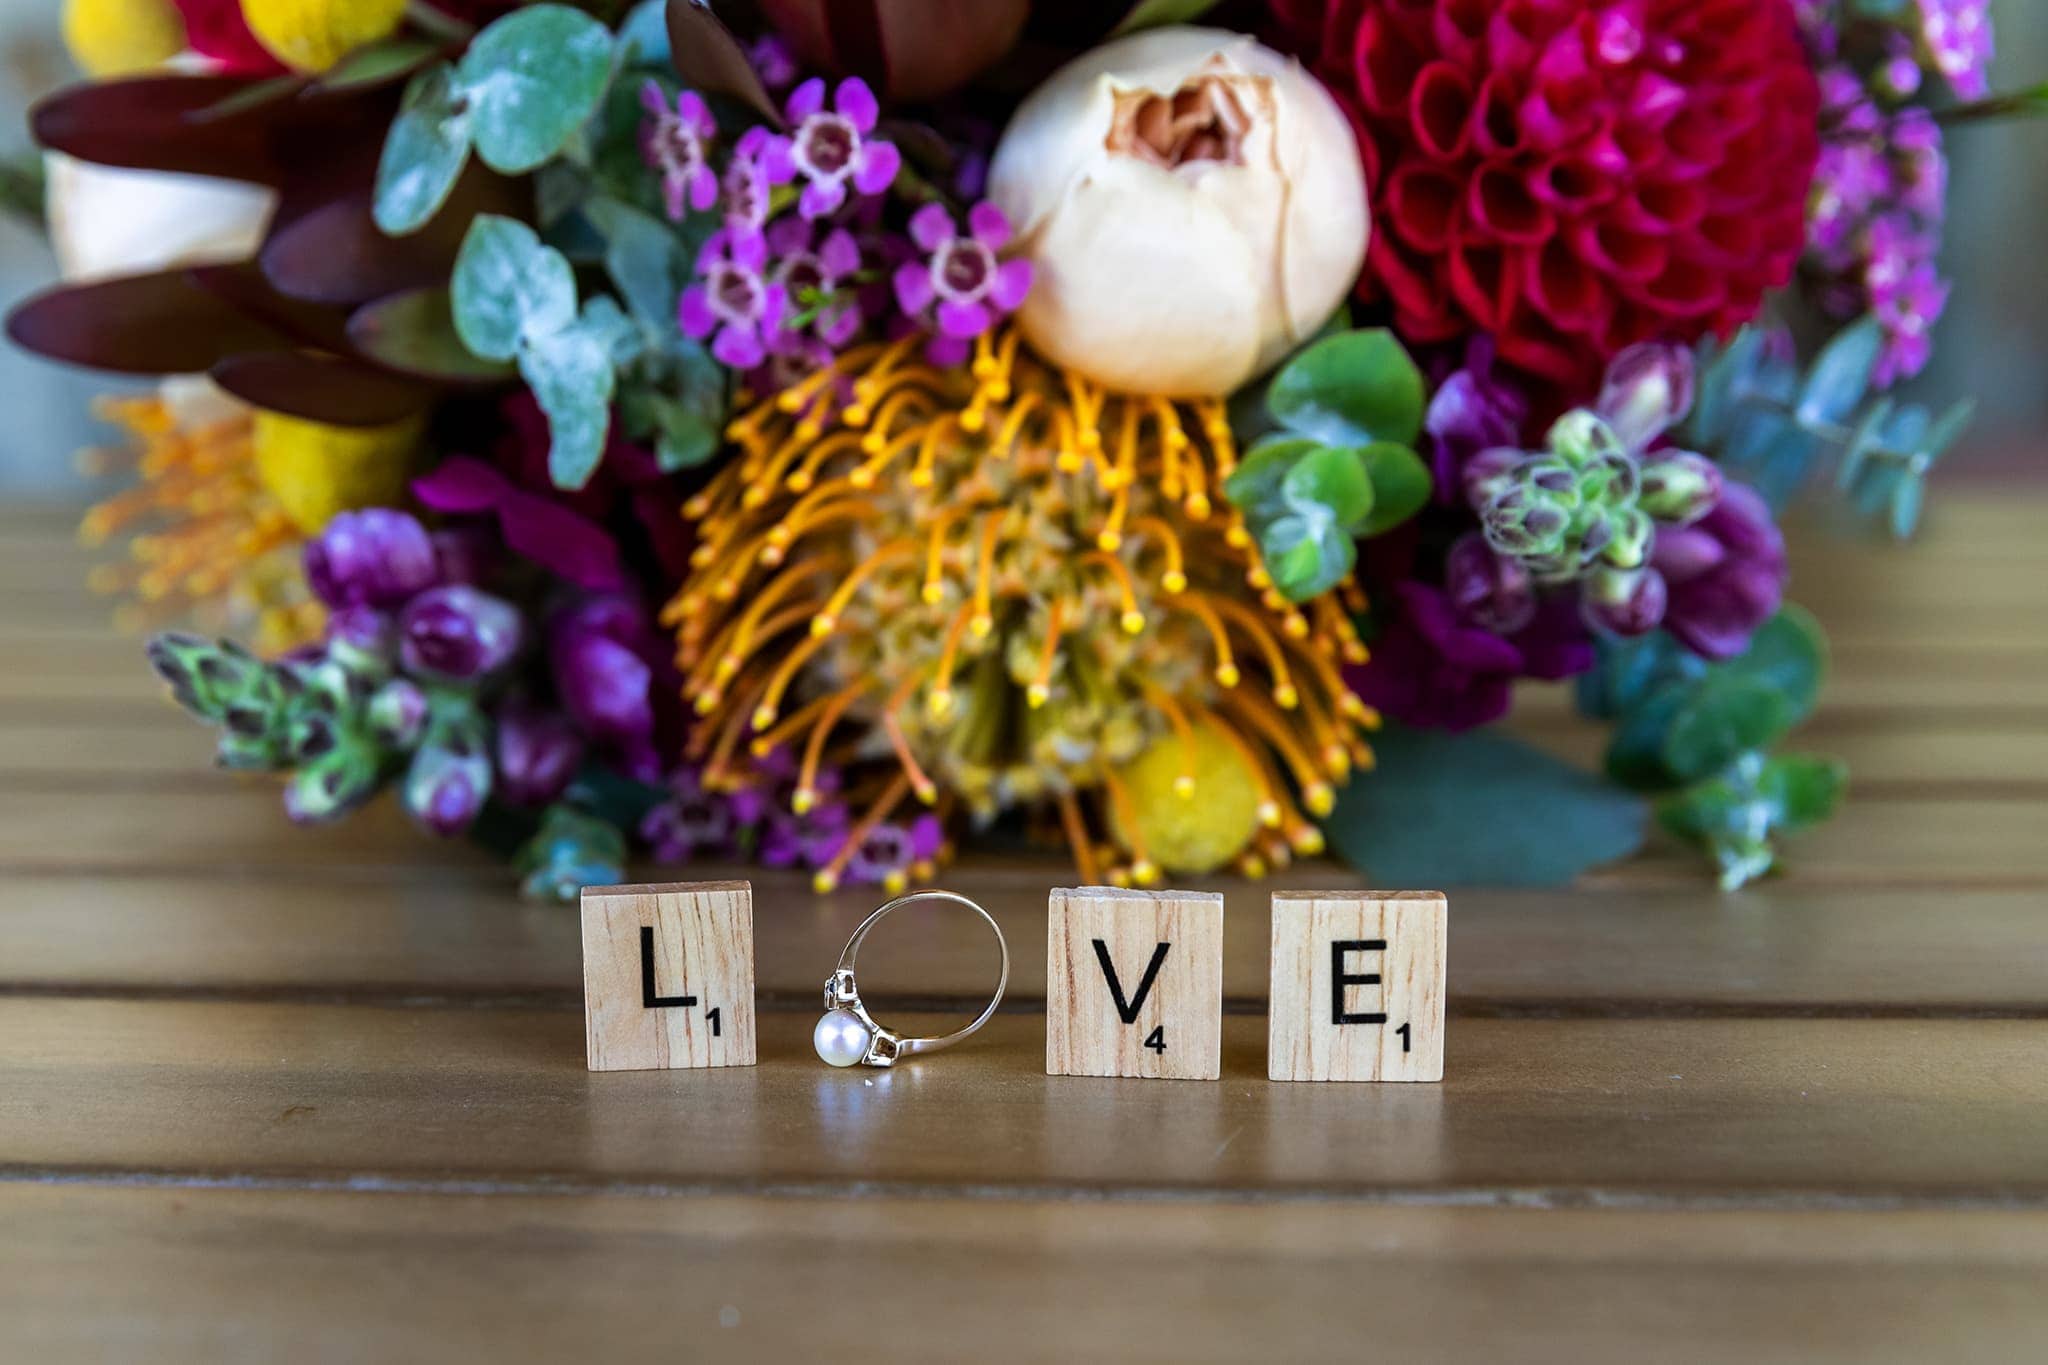 Love letters for wedding details with bride